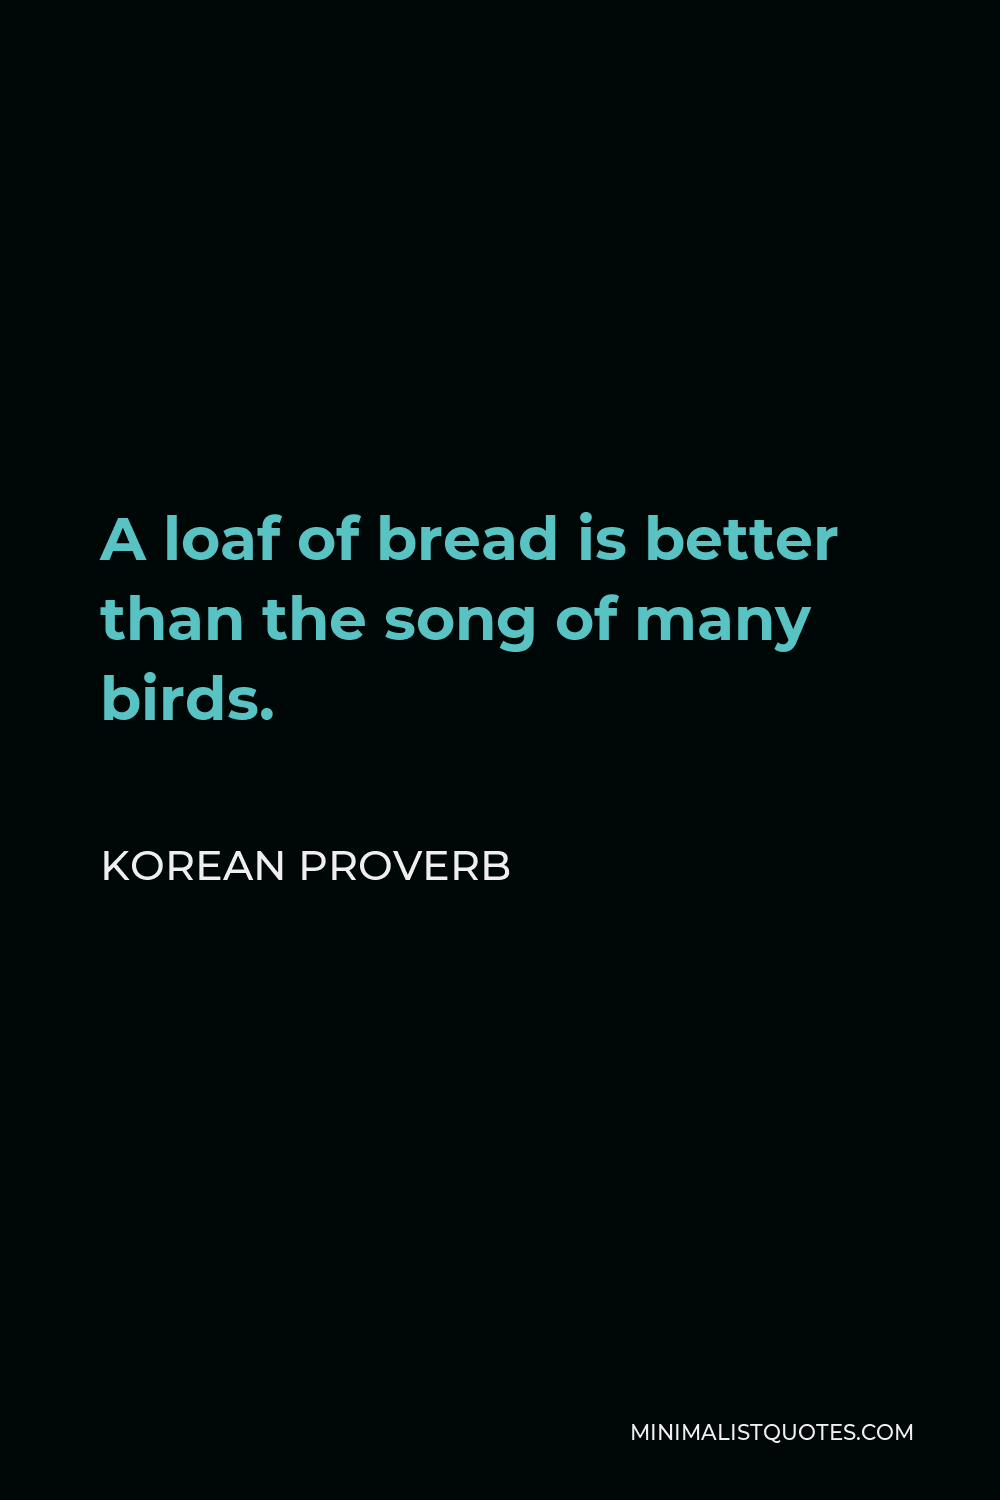 Korean Proverb Quote - A loaf of bread is better than the song of many birds.